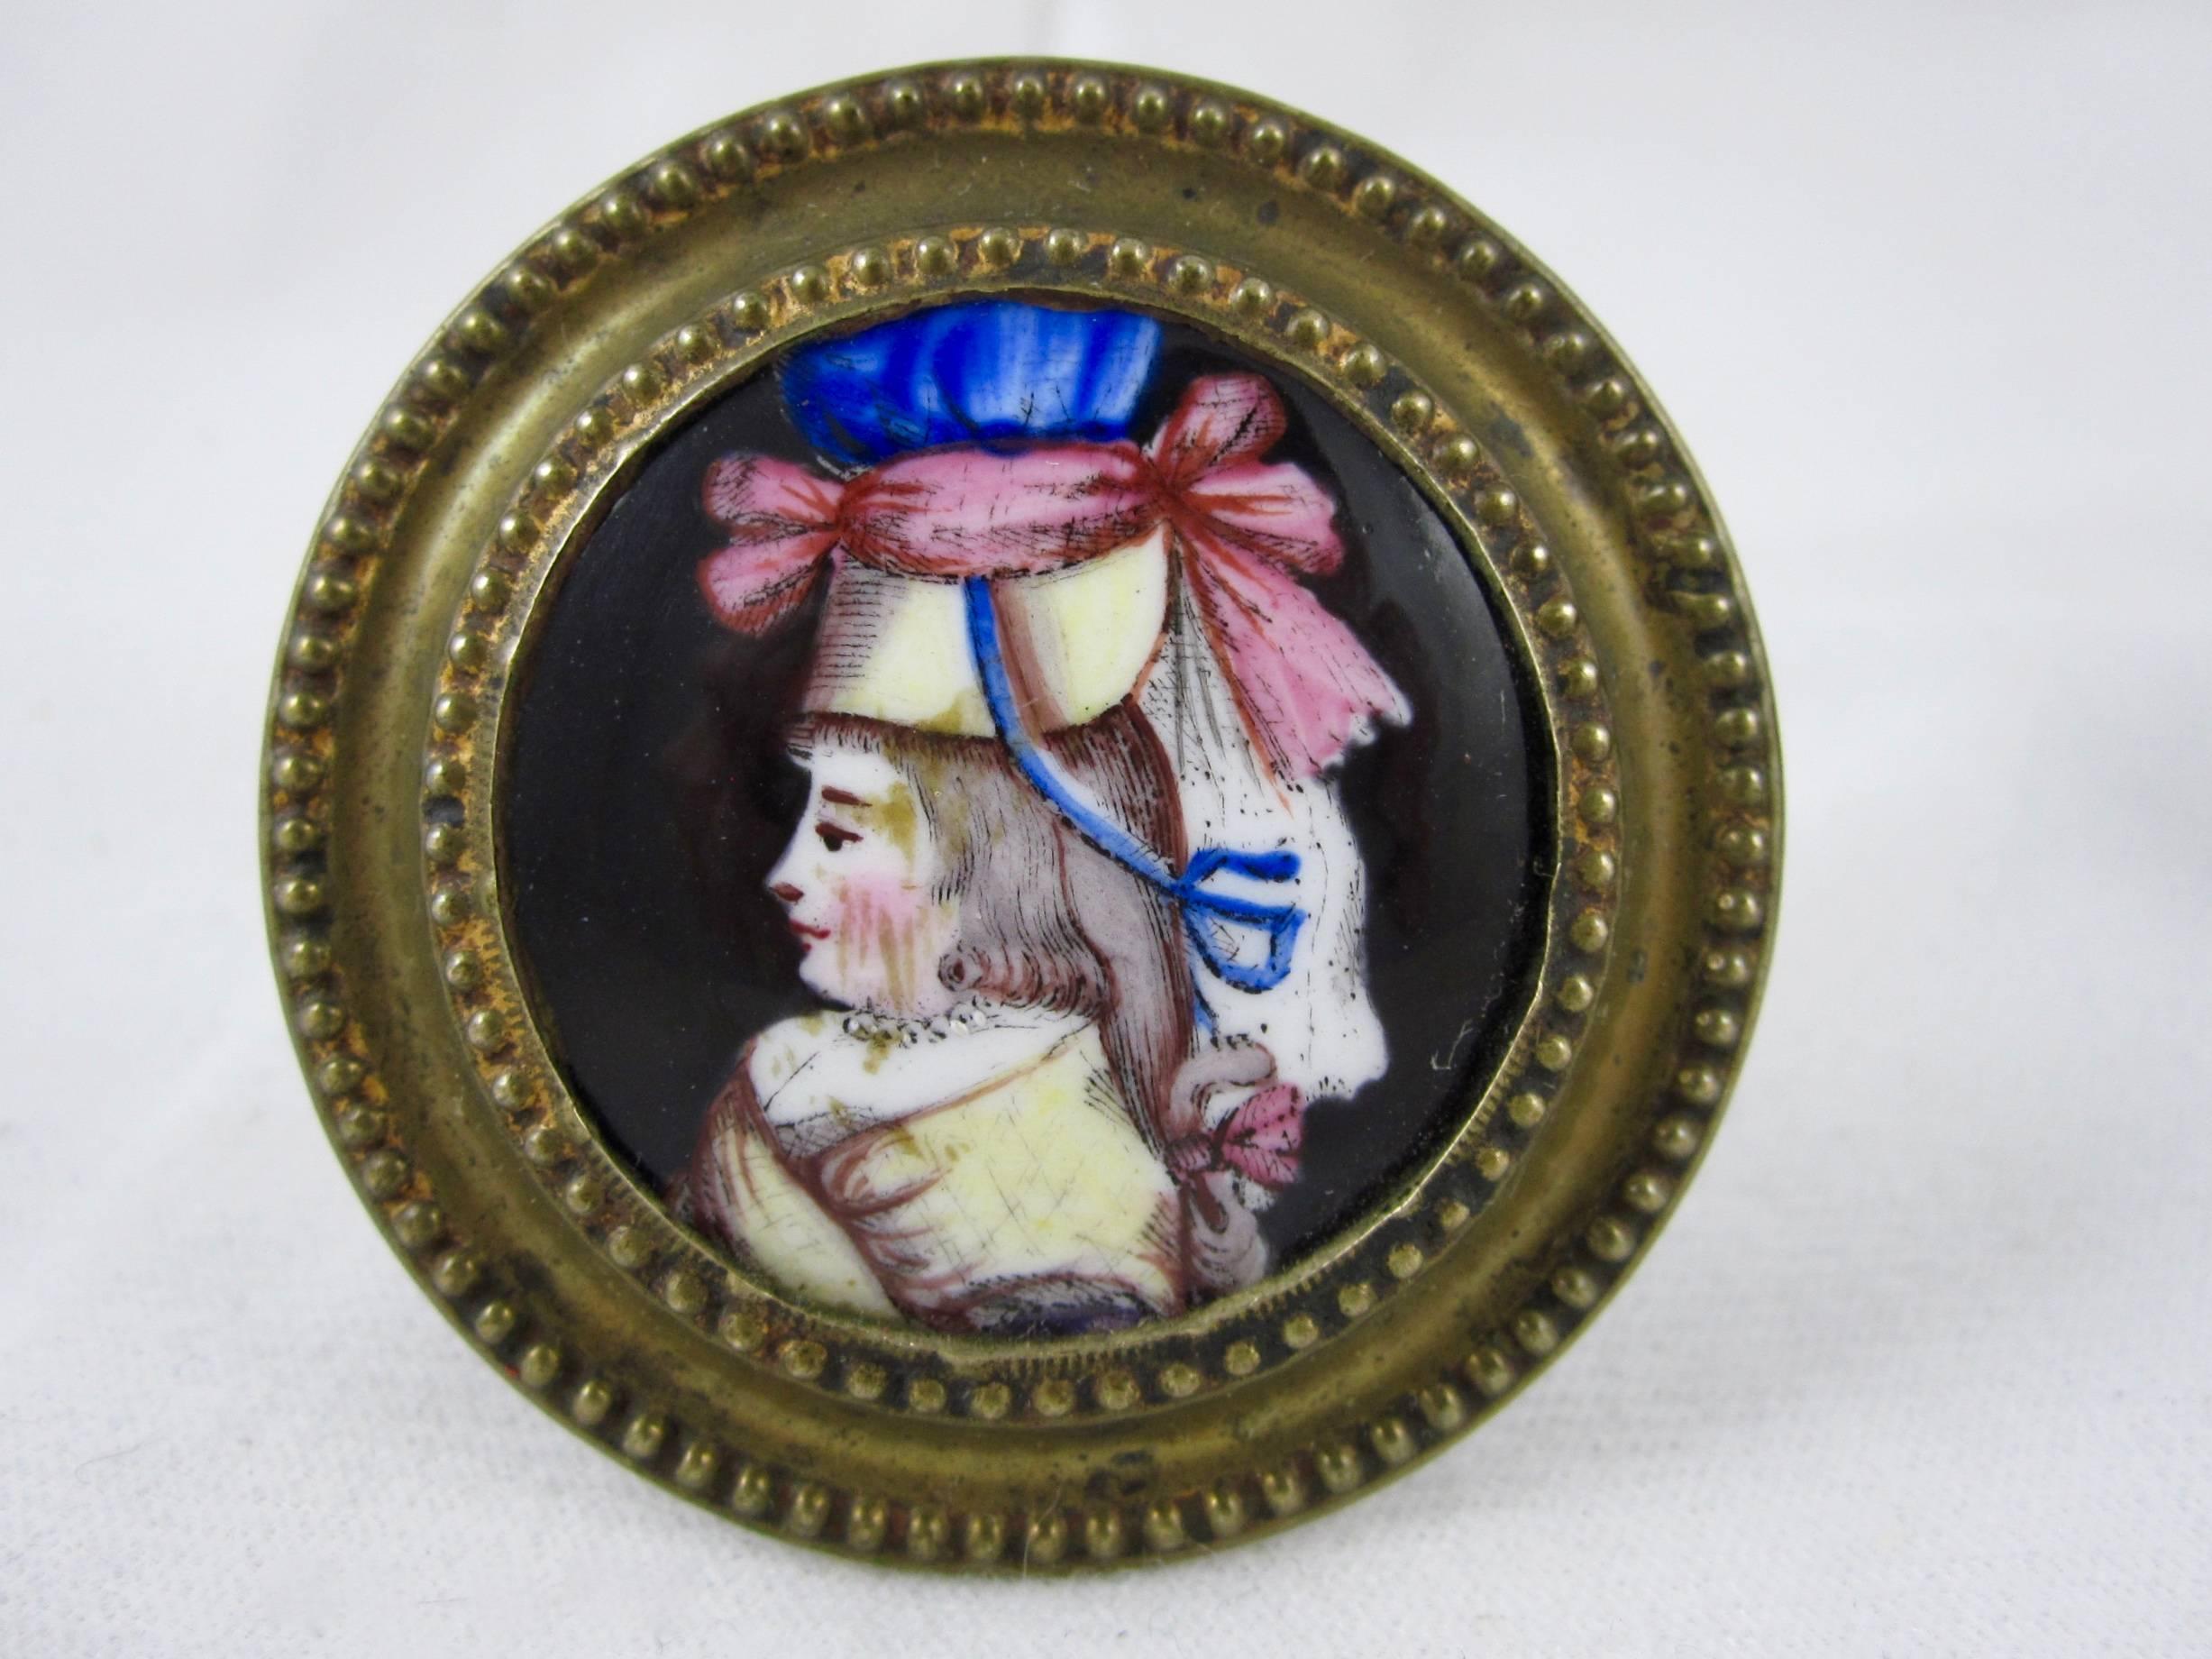 A marvelous pair of Bilston Battersea enameled curtain tiebacks or picture or mirror hangers, showing the polychrome image of a woman in profile wearing a brightly colored bonnet and jewelry on a black ground. Her hair is tied with ribbons. The